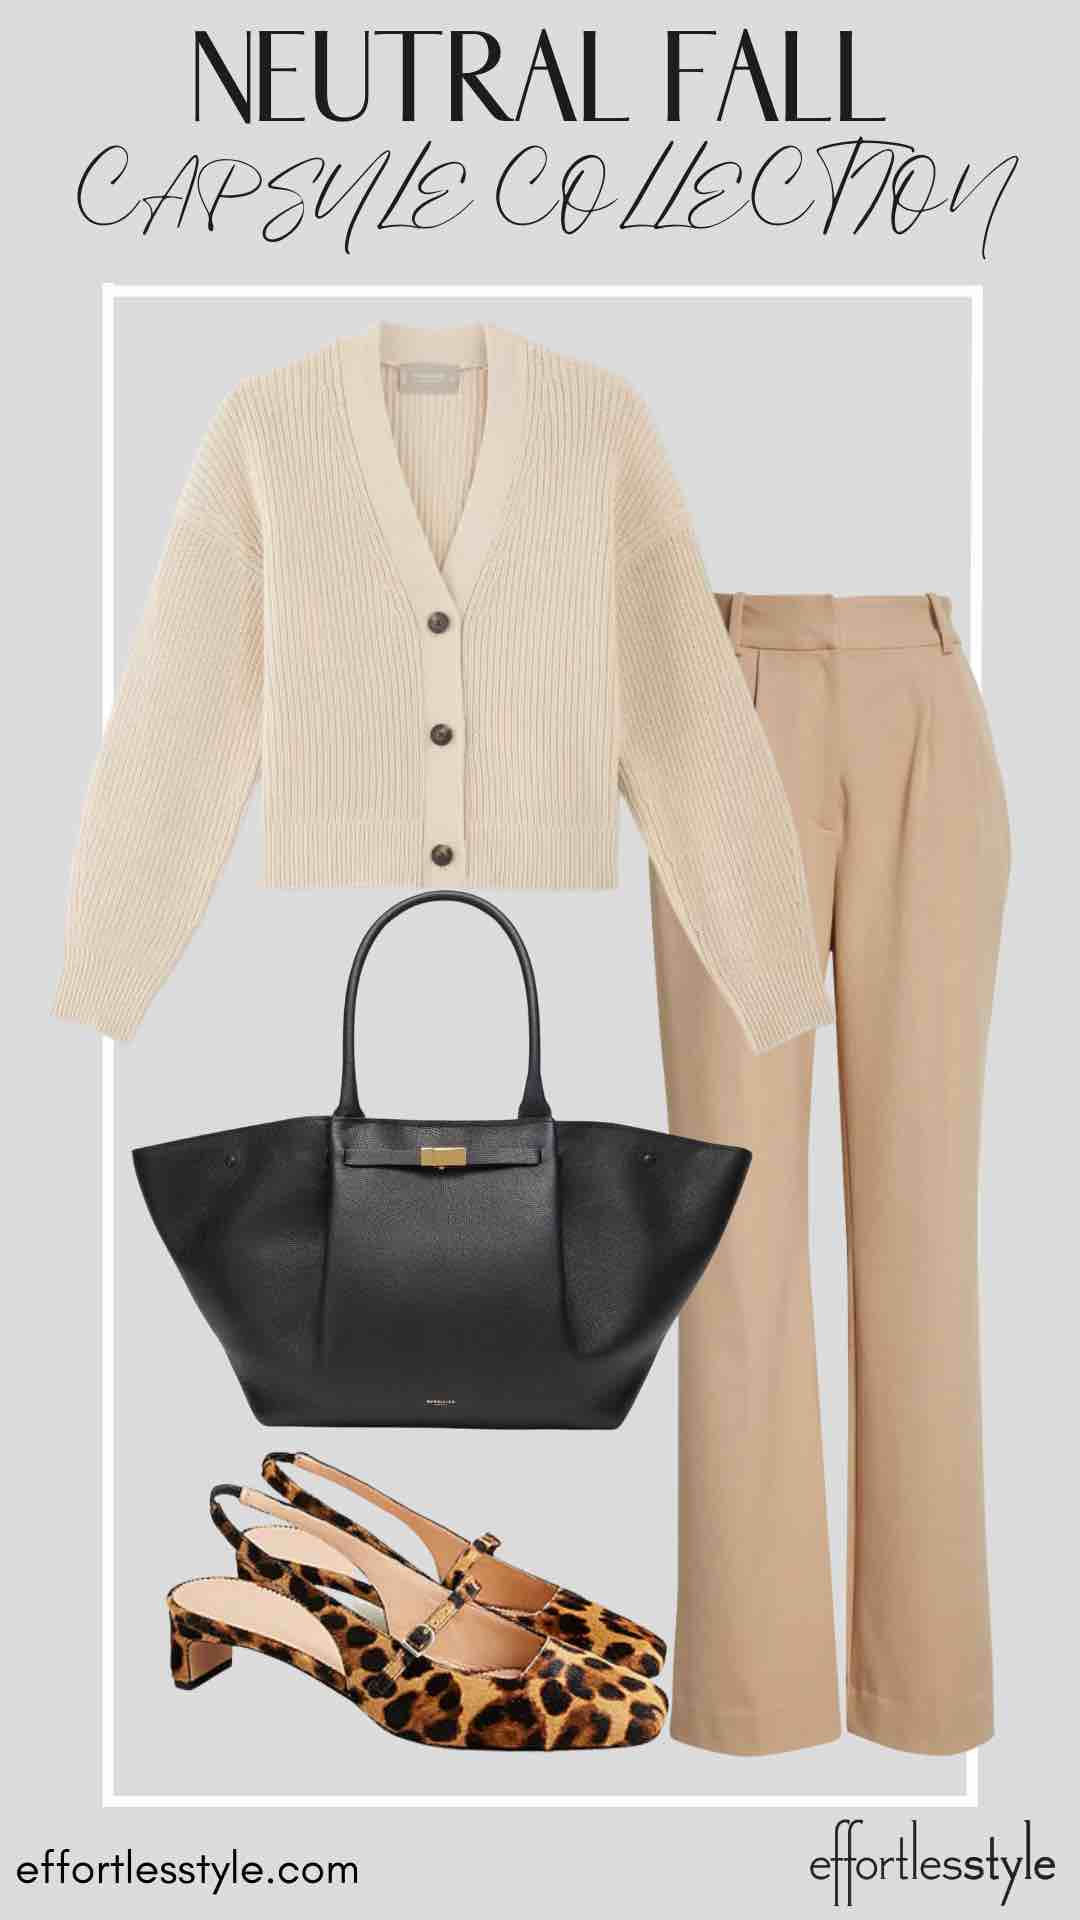 Cardigan & Trousers personal stylists share style inspo for the office what to wear to work this fall styling animal print styling animal print for the office the best fall accessories personal stylists share fall style inspiration